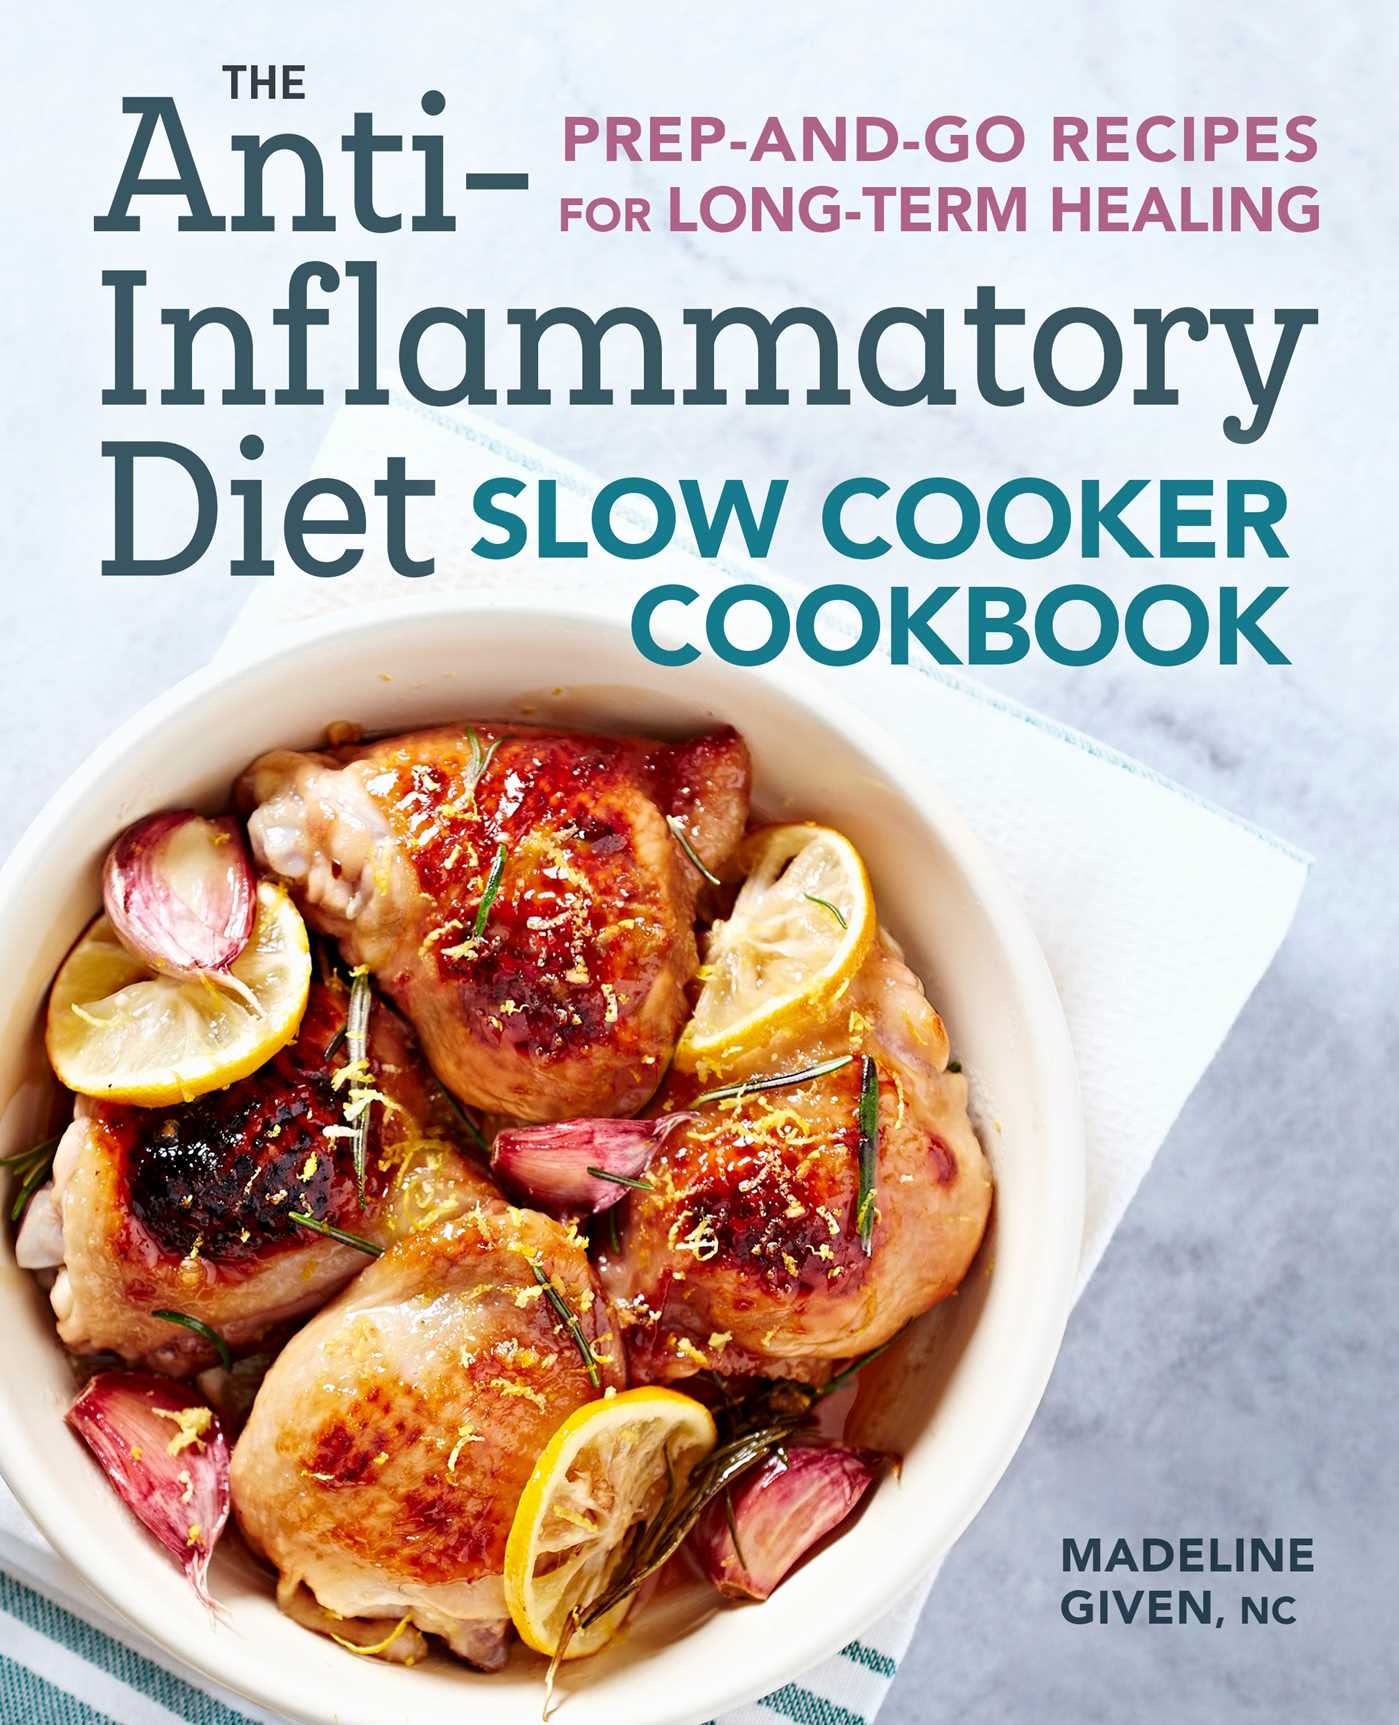 The Anti-Inflammatory Diet Slow Cooker Cookbook: Prep-And-Go Recipes for Long-Term Healing by Given, Madeline